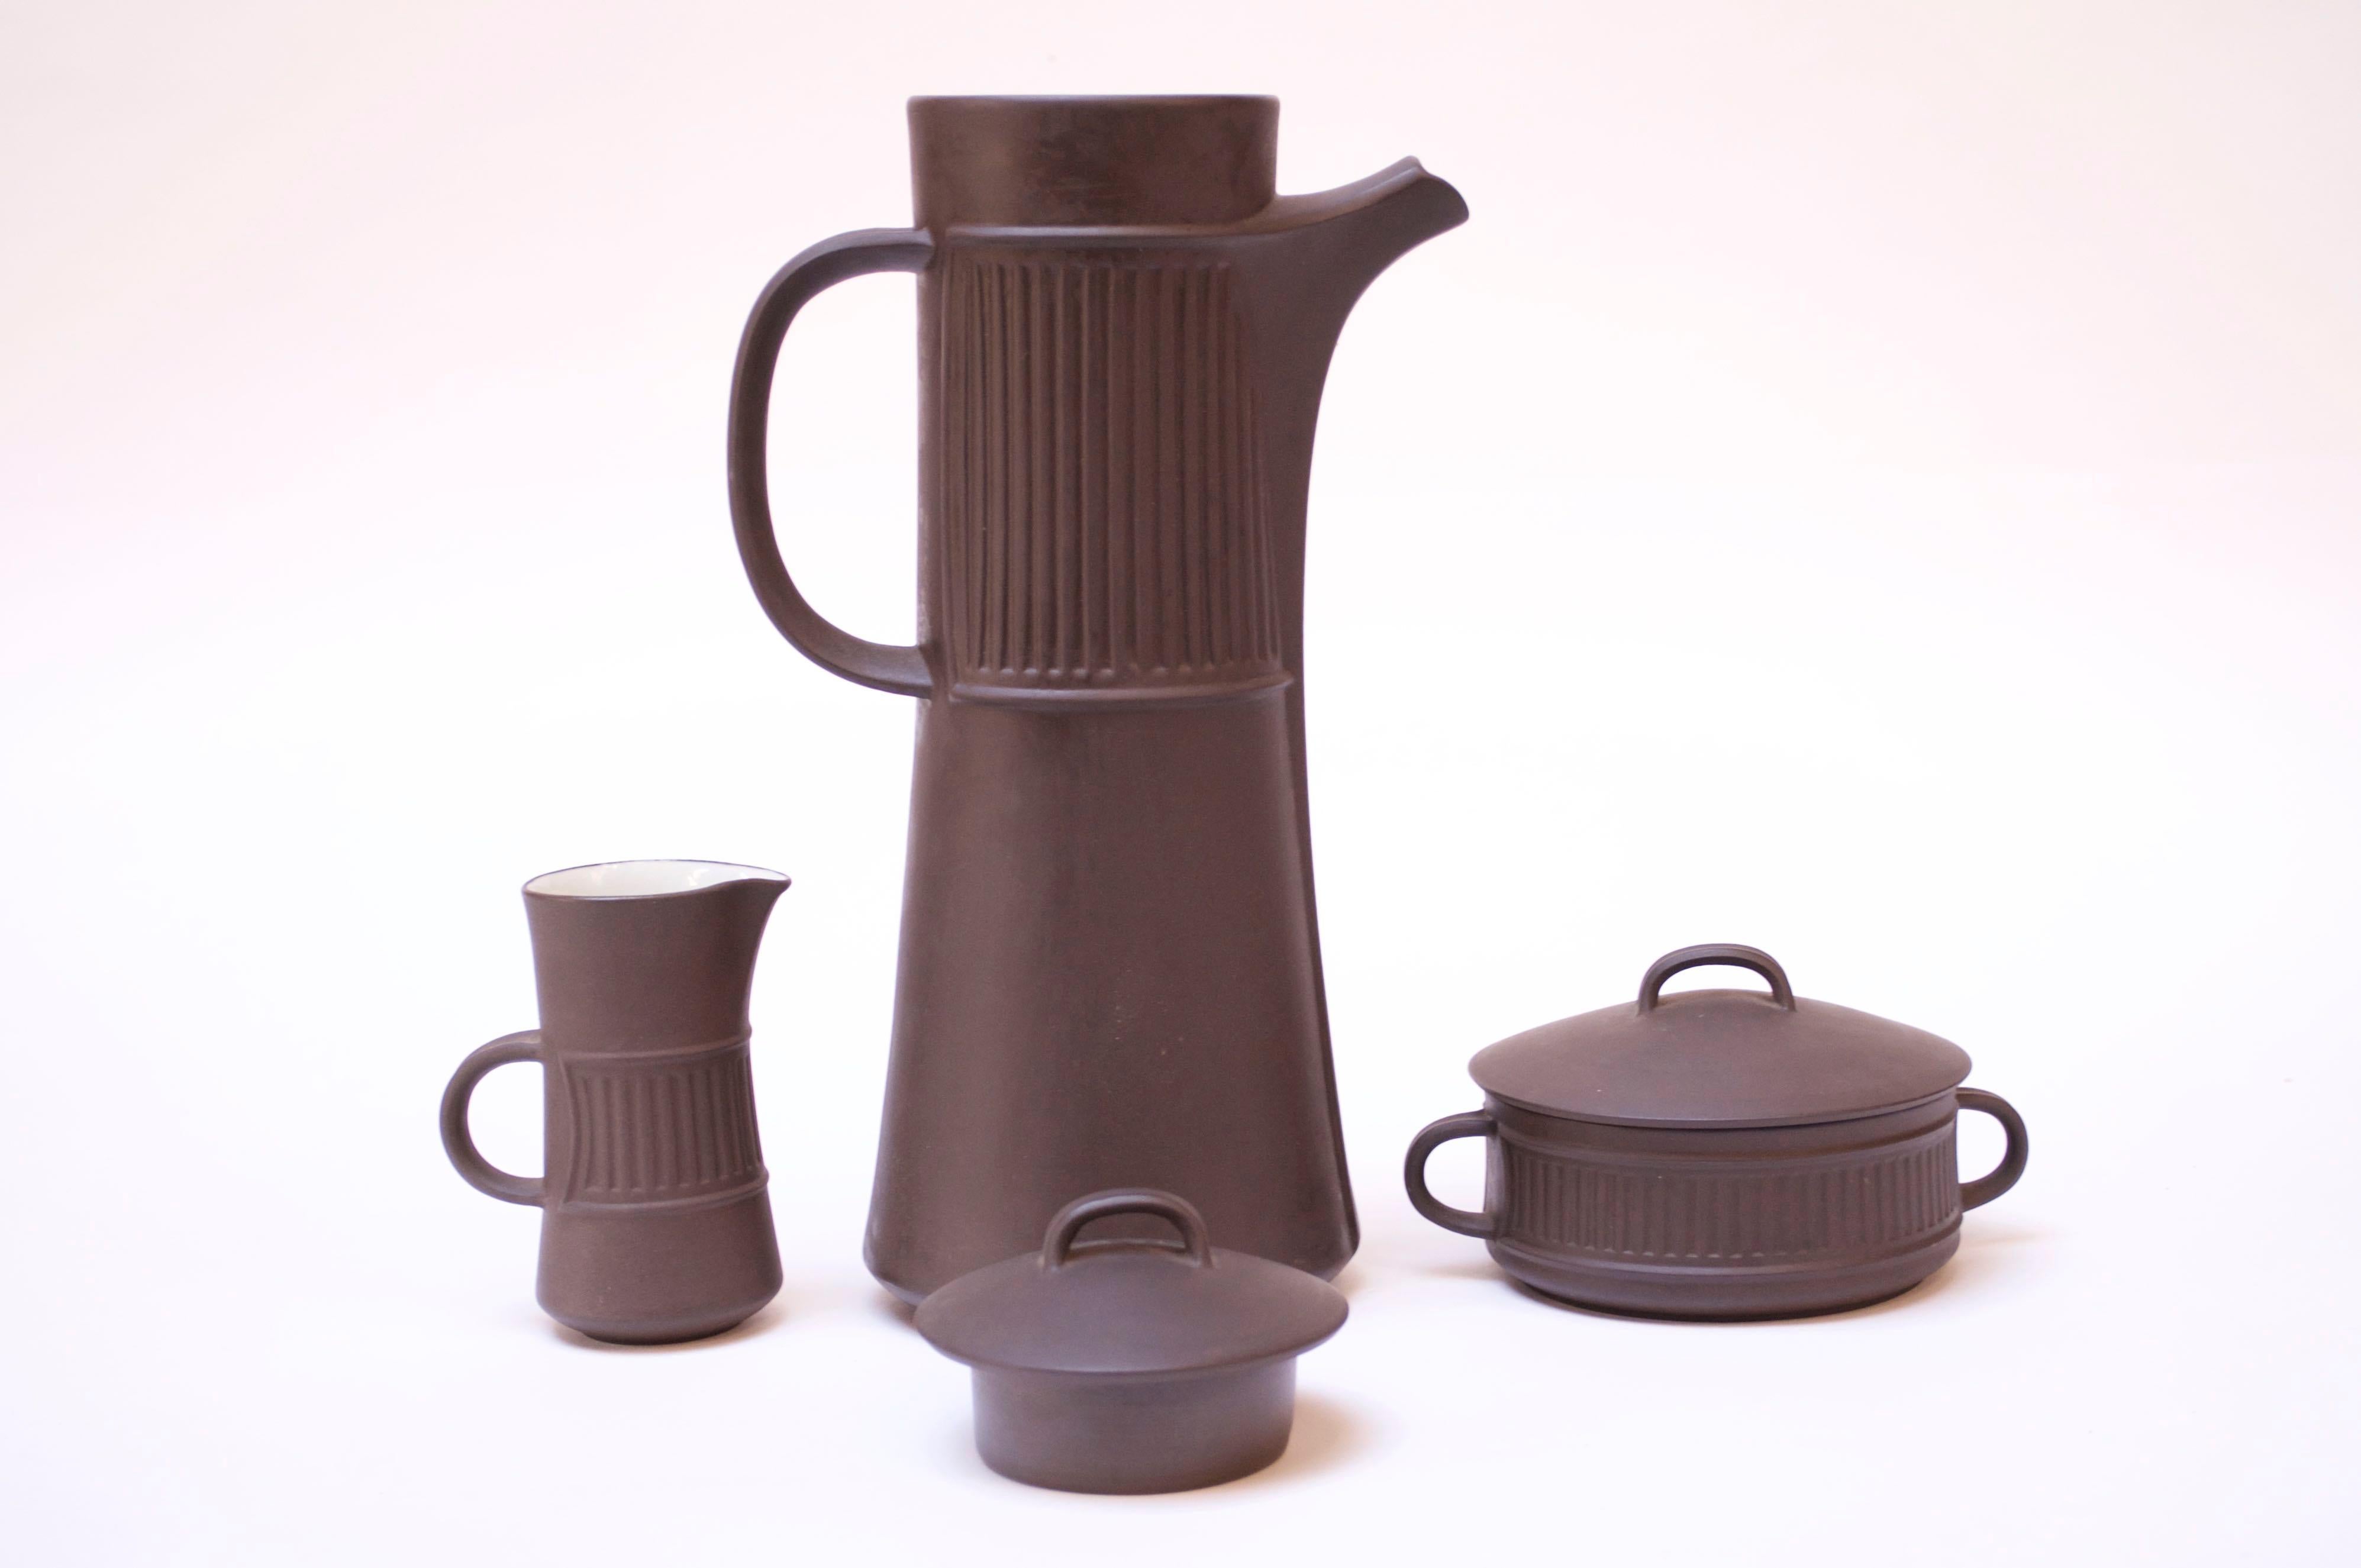 Denmark 'Flamestone' coffee or tea pot, creamer, and sugar by Jens H. Quistgaard for Dansk designs, circa 1958-1964 Features the Flamestone signature slate, almost brown glazed-earthenware with striated pattern and white porcelain interior. Elegant,